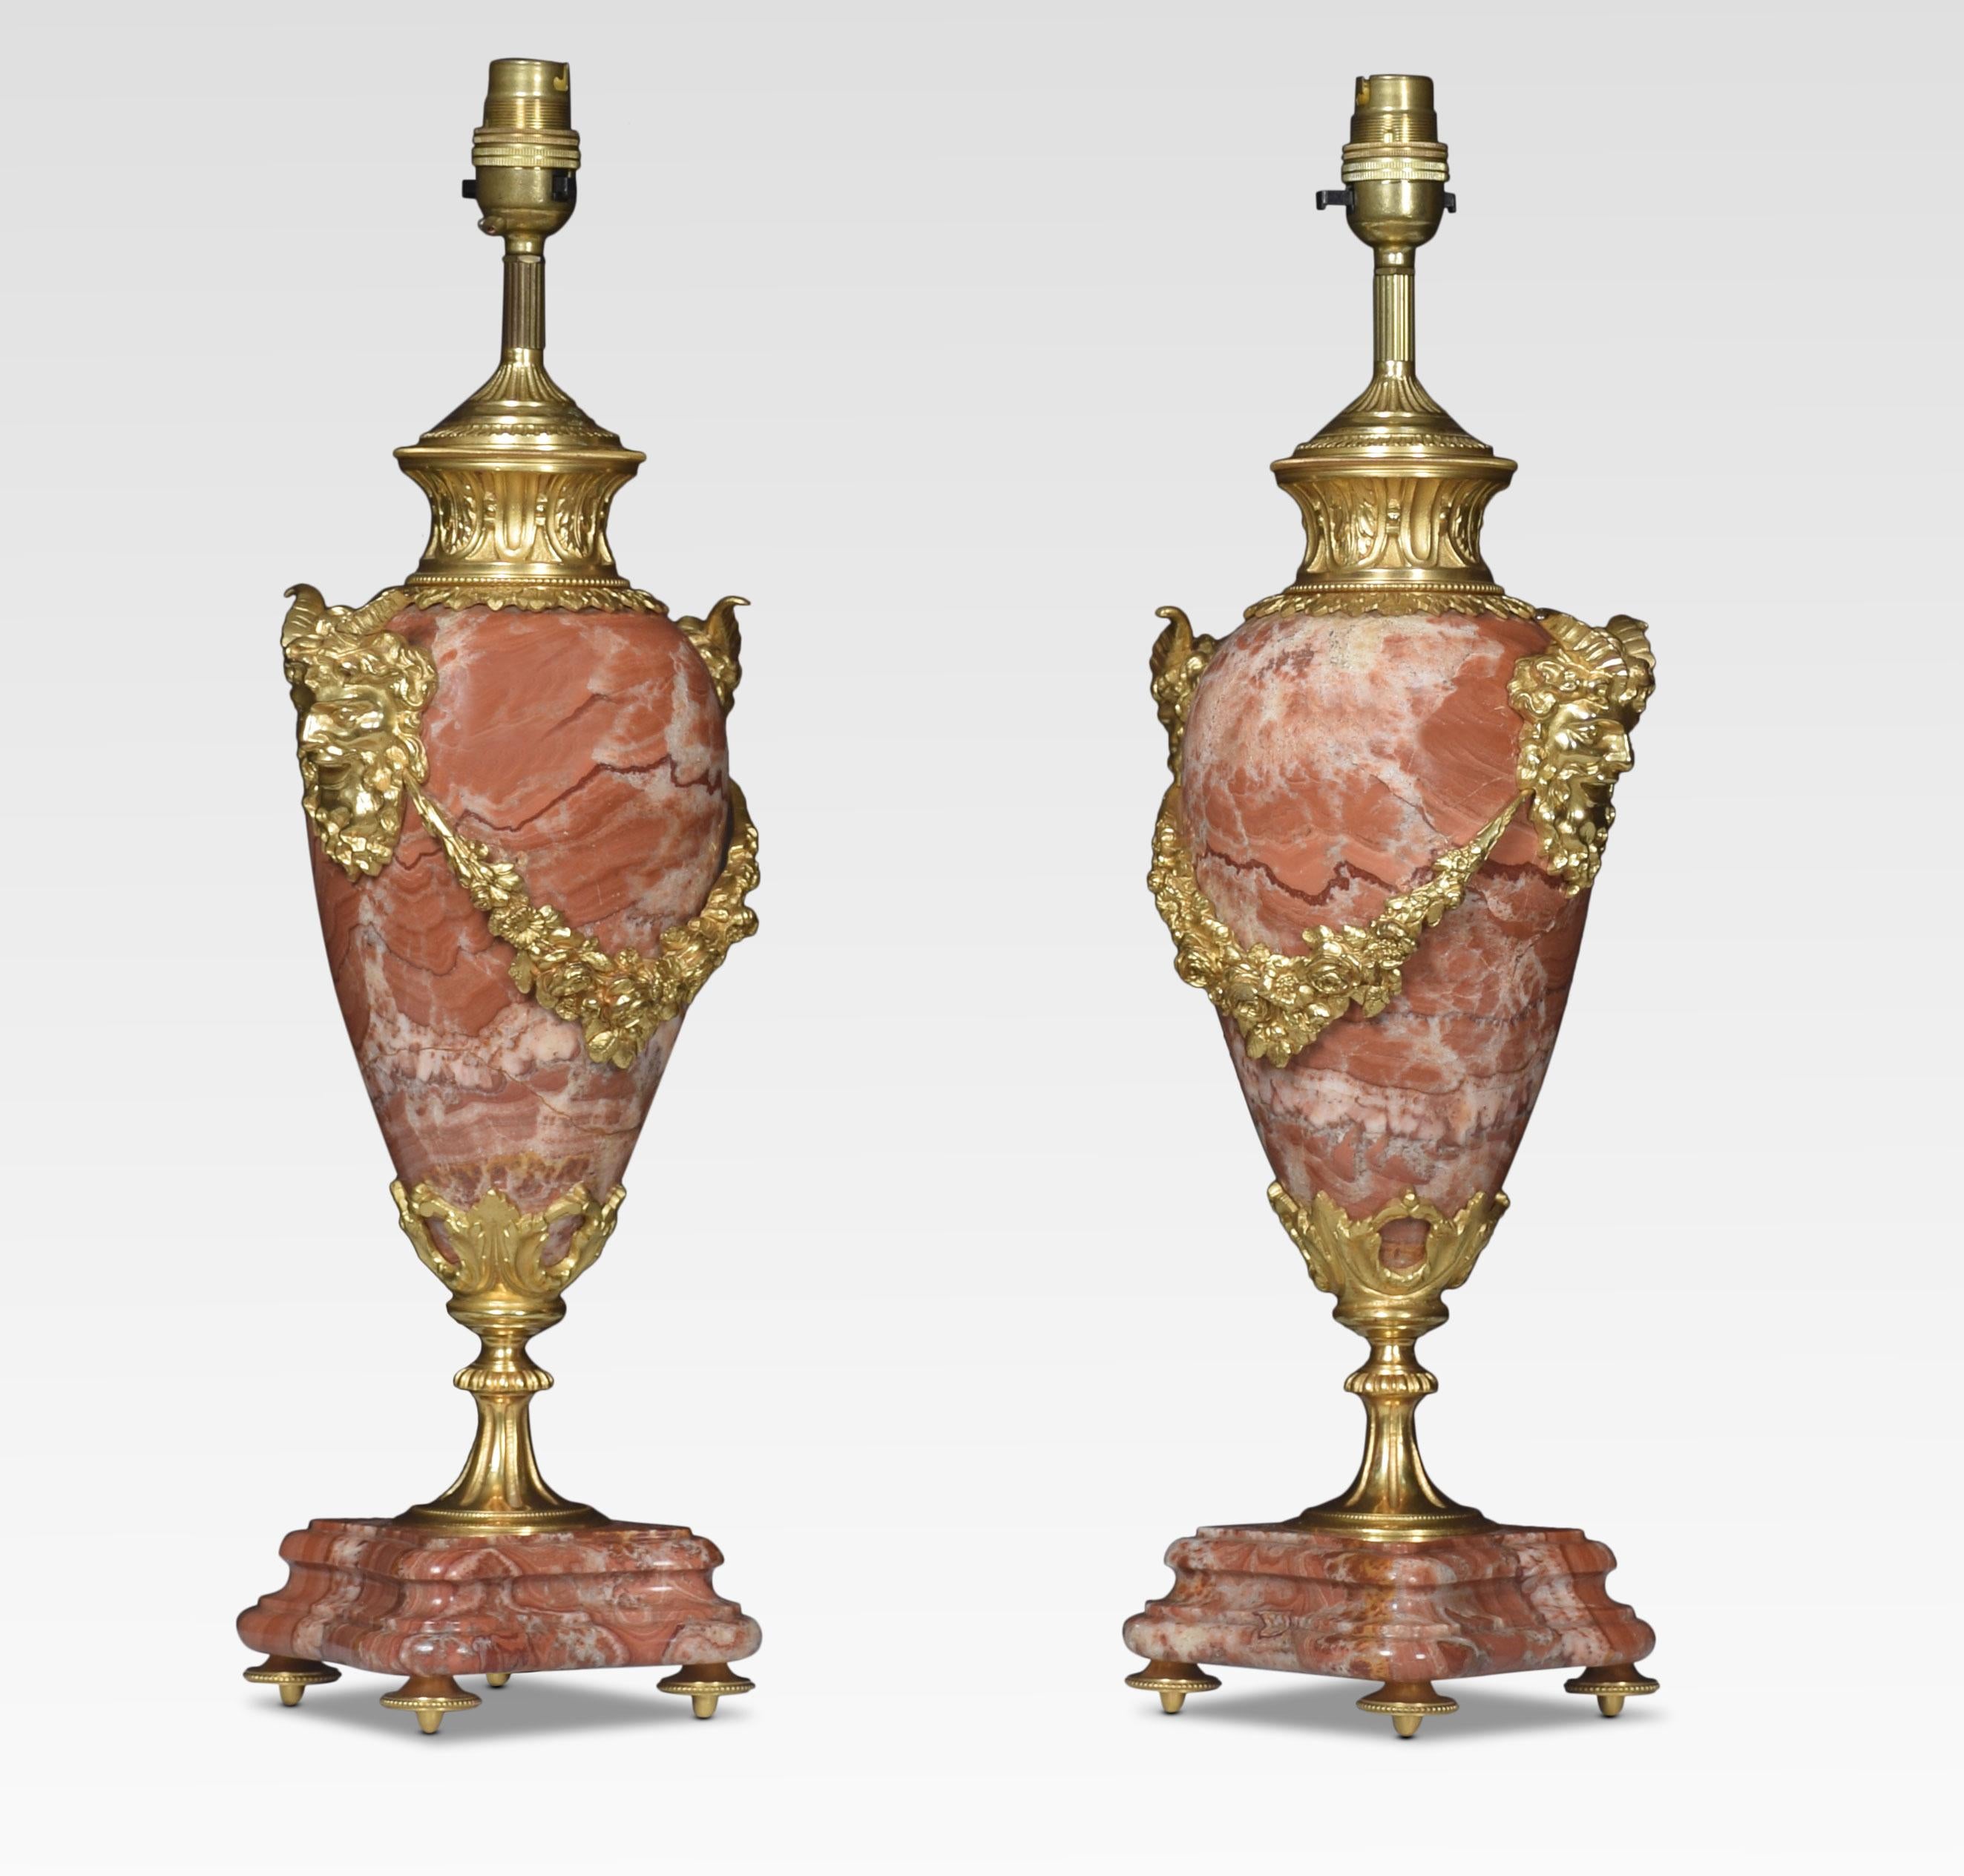 Pair of gilt brass mounted rouge marble table lamps with satyr mask handles and floral swags raised up on shaped stepped bases. Together with silk shades.
(the lamps have been re-wired).
Dimensions of Lamps without shades
Height 19.5